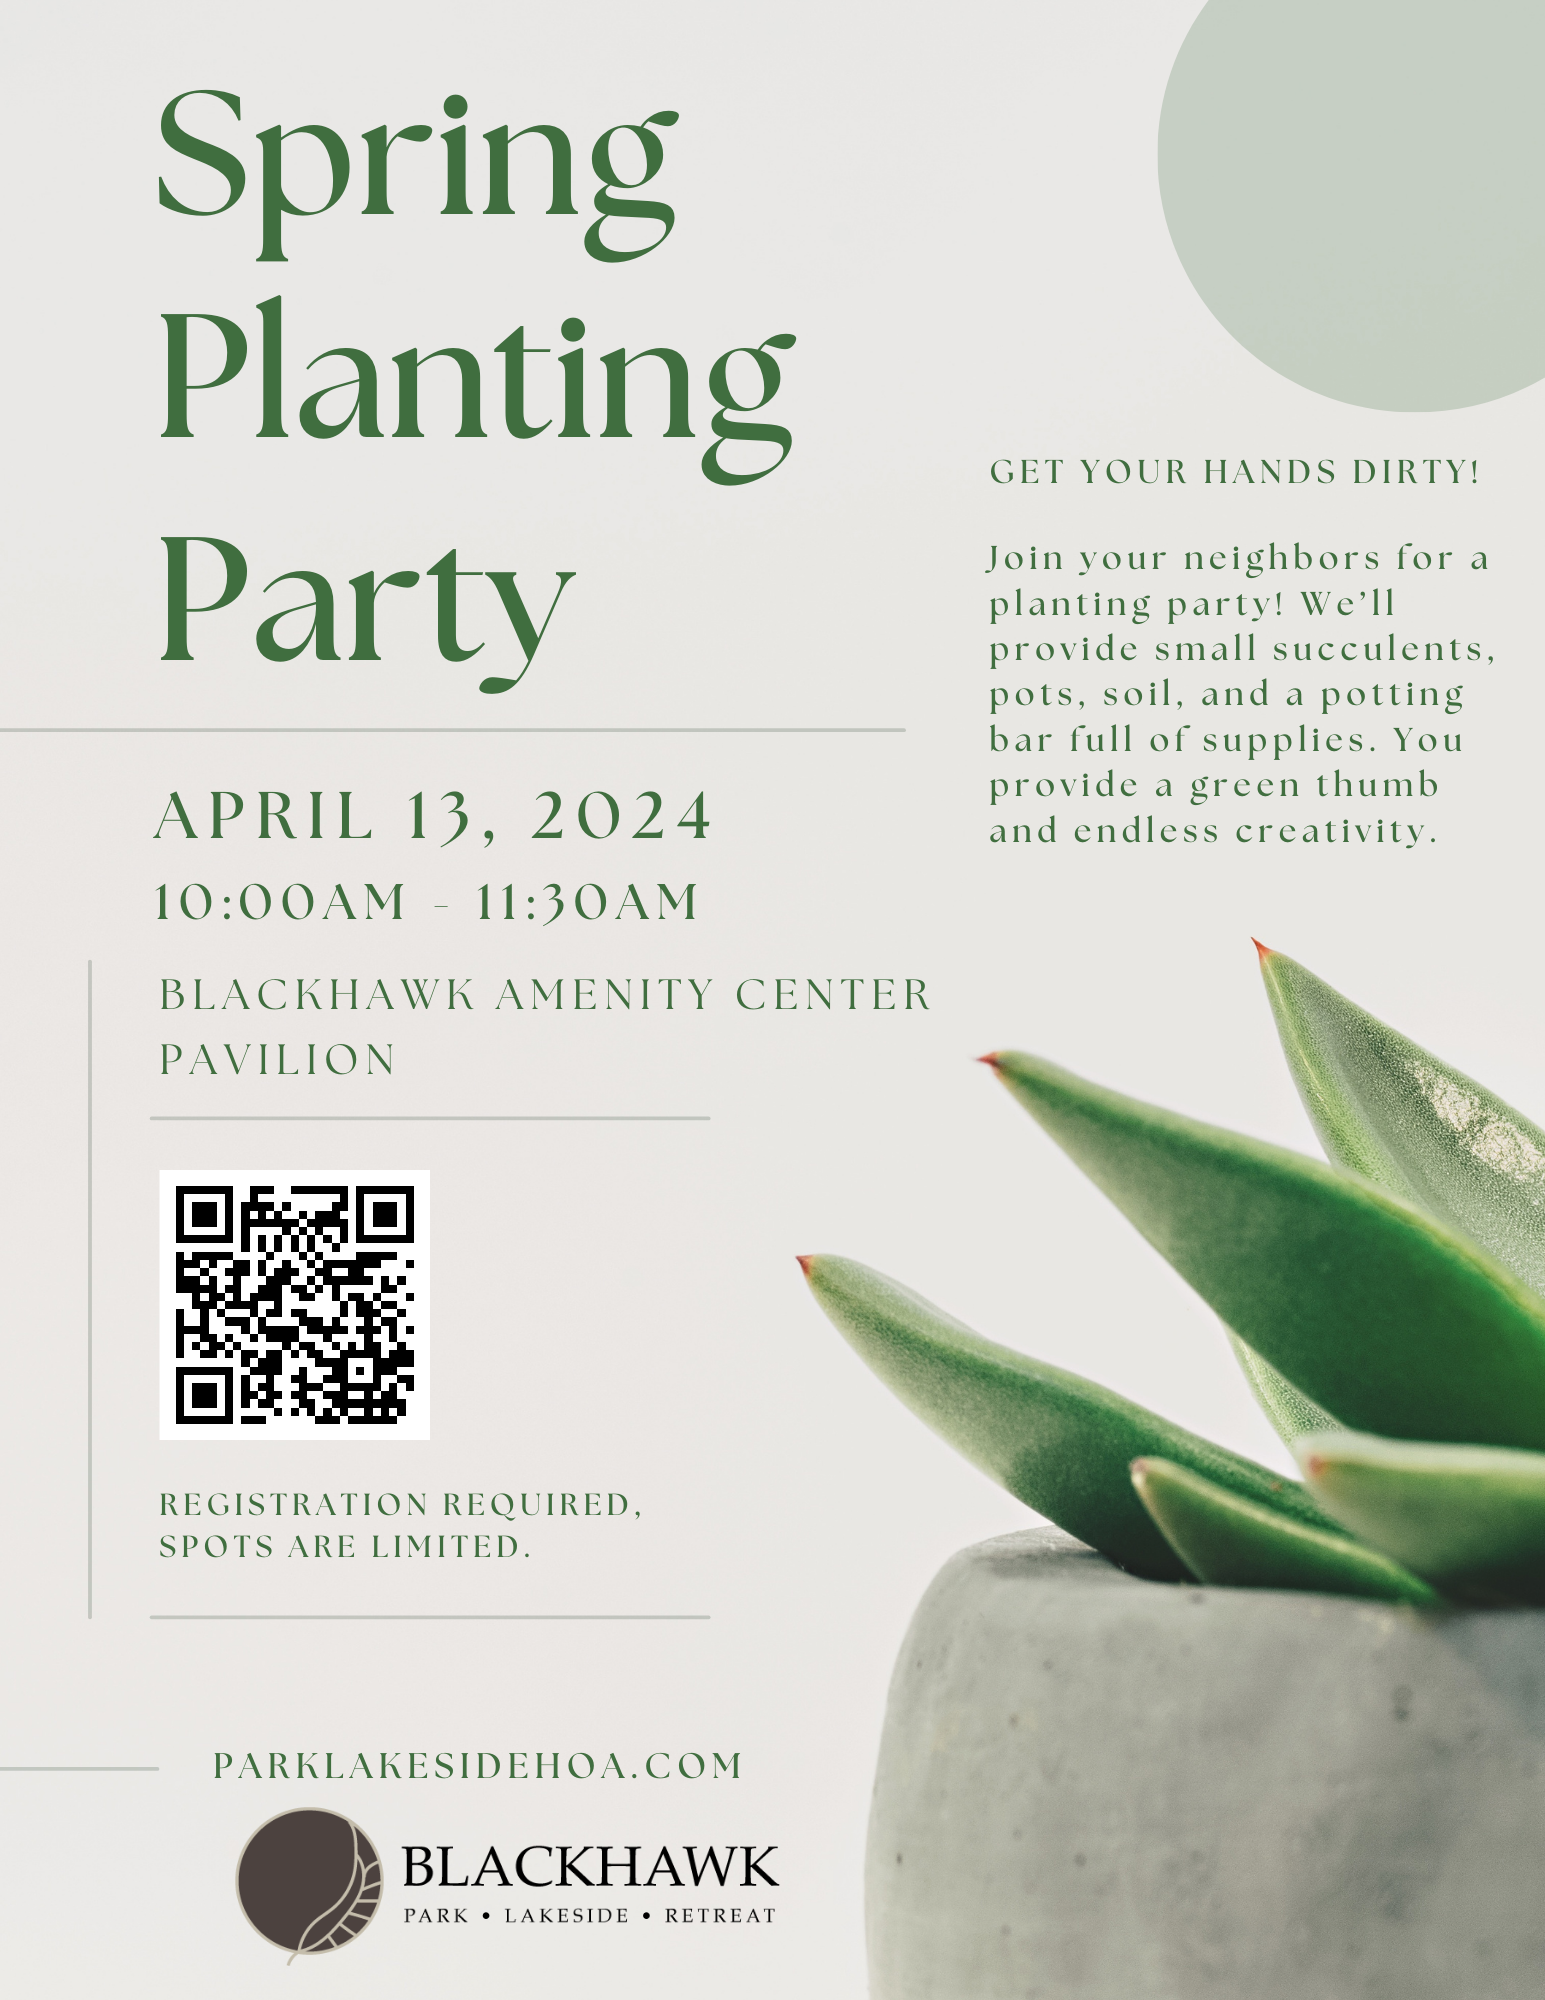 A stylish flyer for a Spring Planting Party on April 13, 2024, from 10:00 am to 11:30 am at the Blackhawk Amenity Center Pavilion. The flyer is designed with a clean, modern aesthetic, featuring bold green text against a white background with a green circular graphic and a photo of a succulent in a gray pot. It announces the event details and encourages participants to 'Get your hands dirty!' by joining a planting party where small succulents, pots, soil, and a potting bar full of supplies will be provided. Attendees are invited to bring their green thumb and creativity. The bottom of the flyer notes that registration is required with limited spots and includes a QR code for registration, the website parklakesidehoa.com, and the Blackhawk logo.